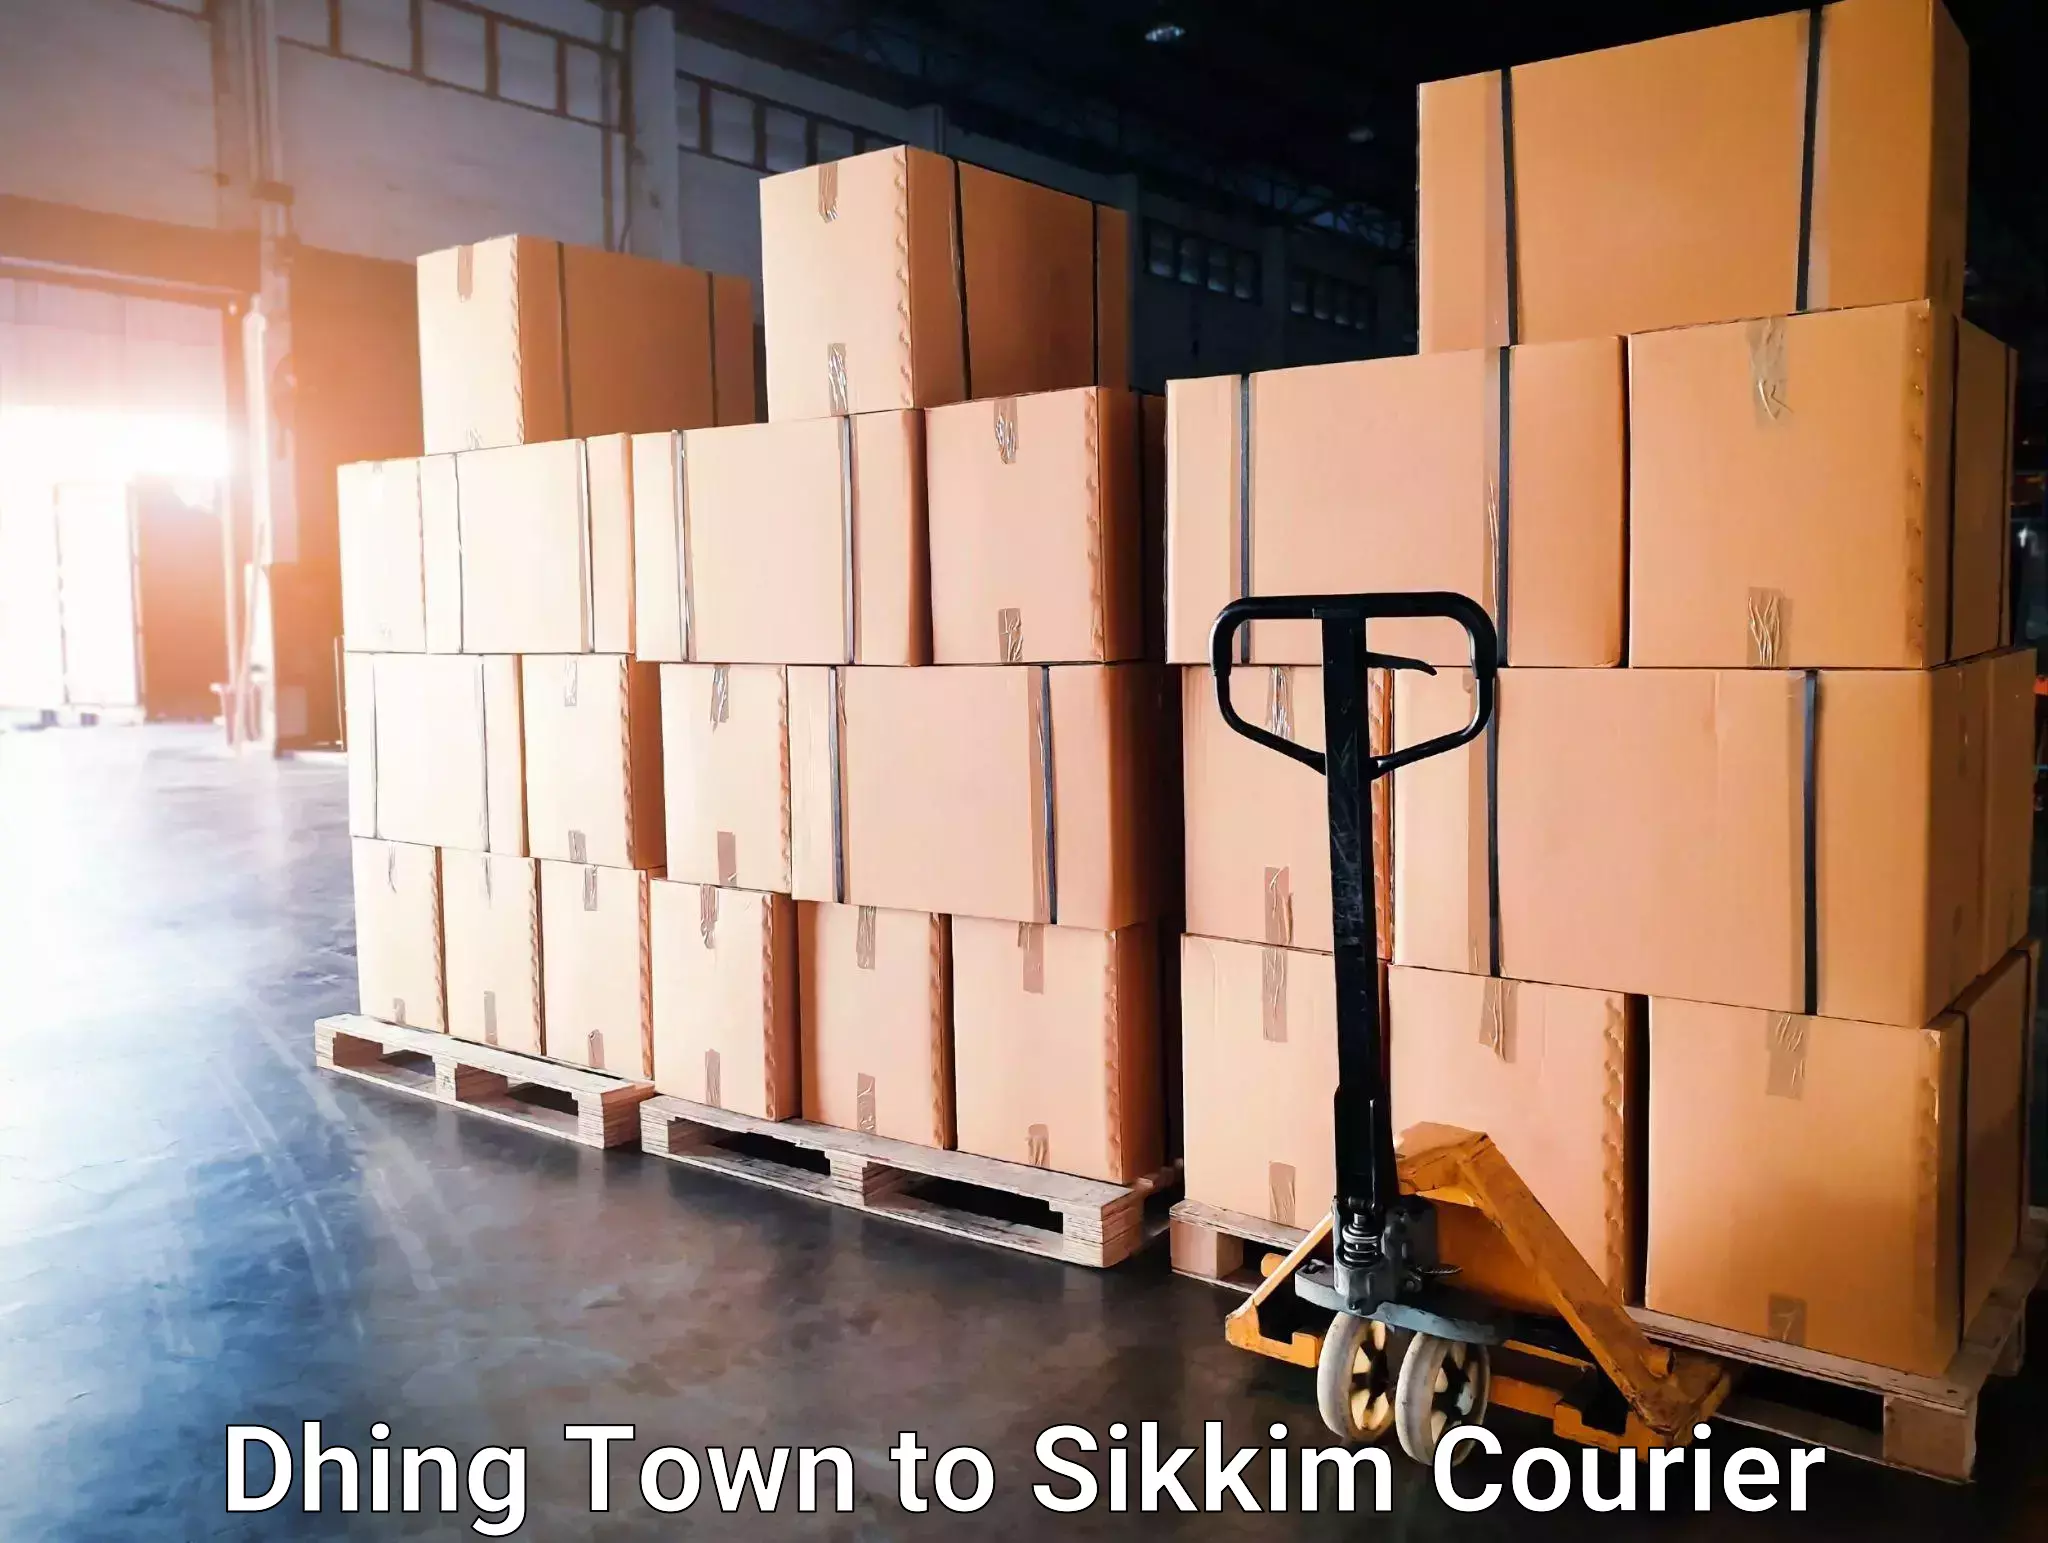 Express delivery network Dhing Town to Sikkim